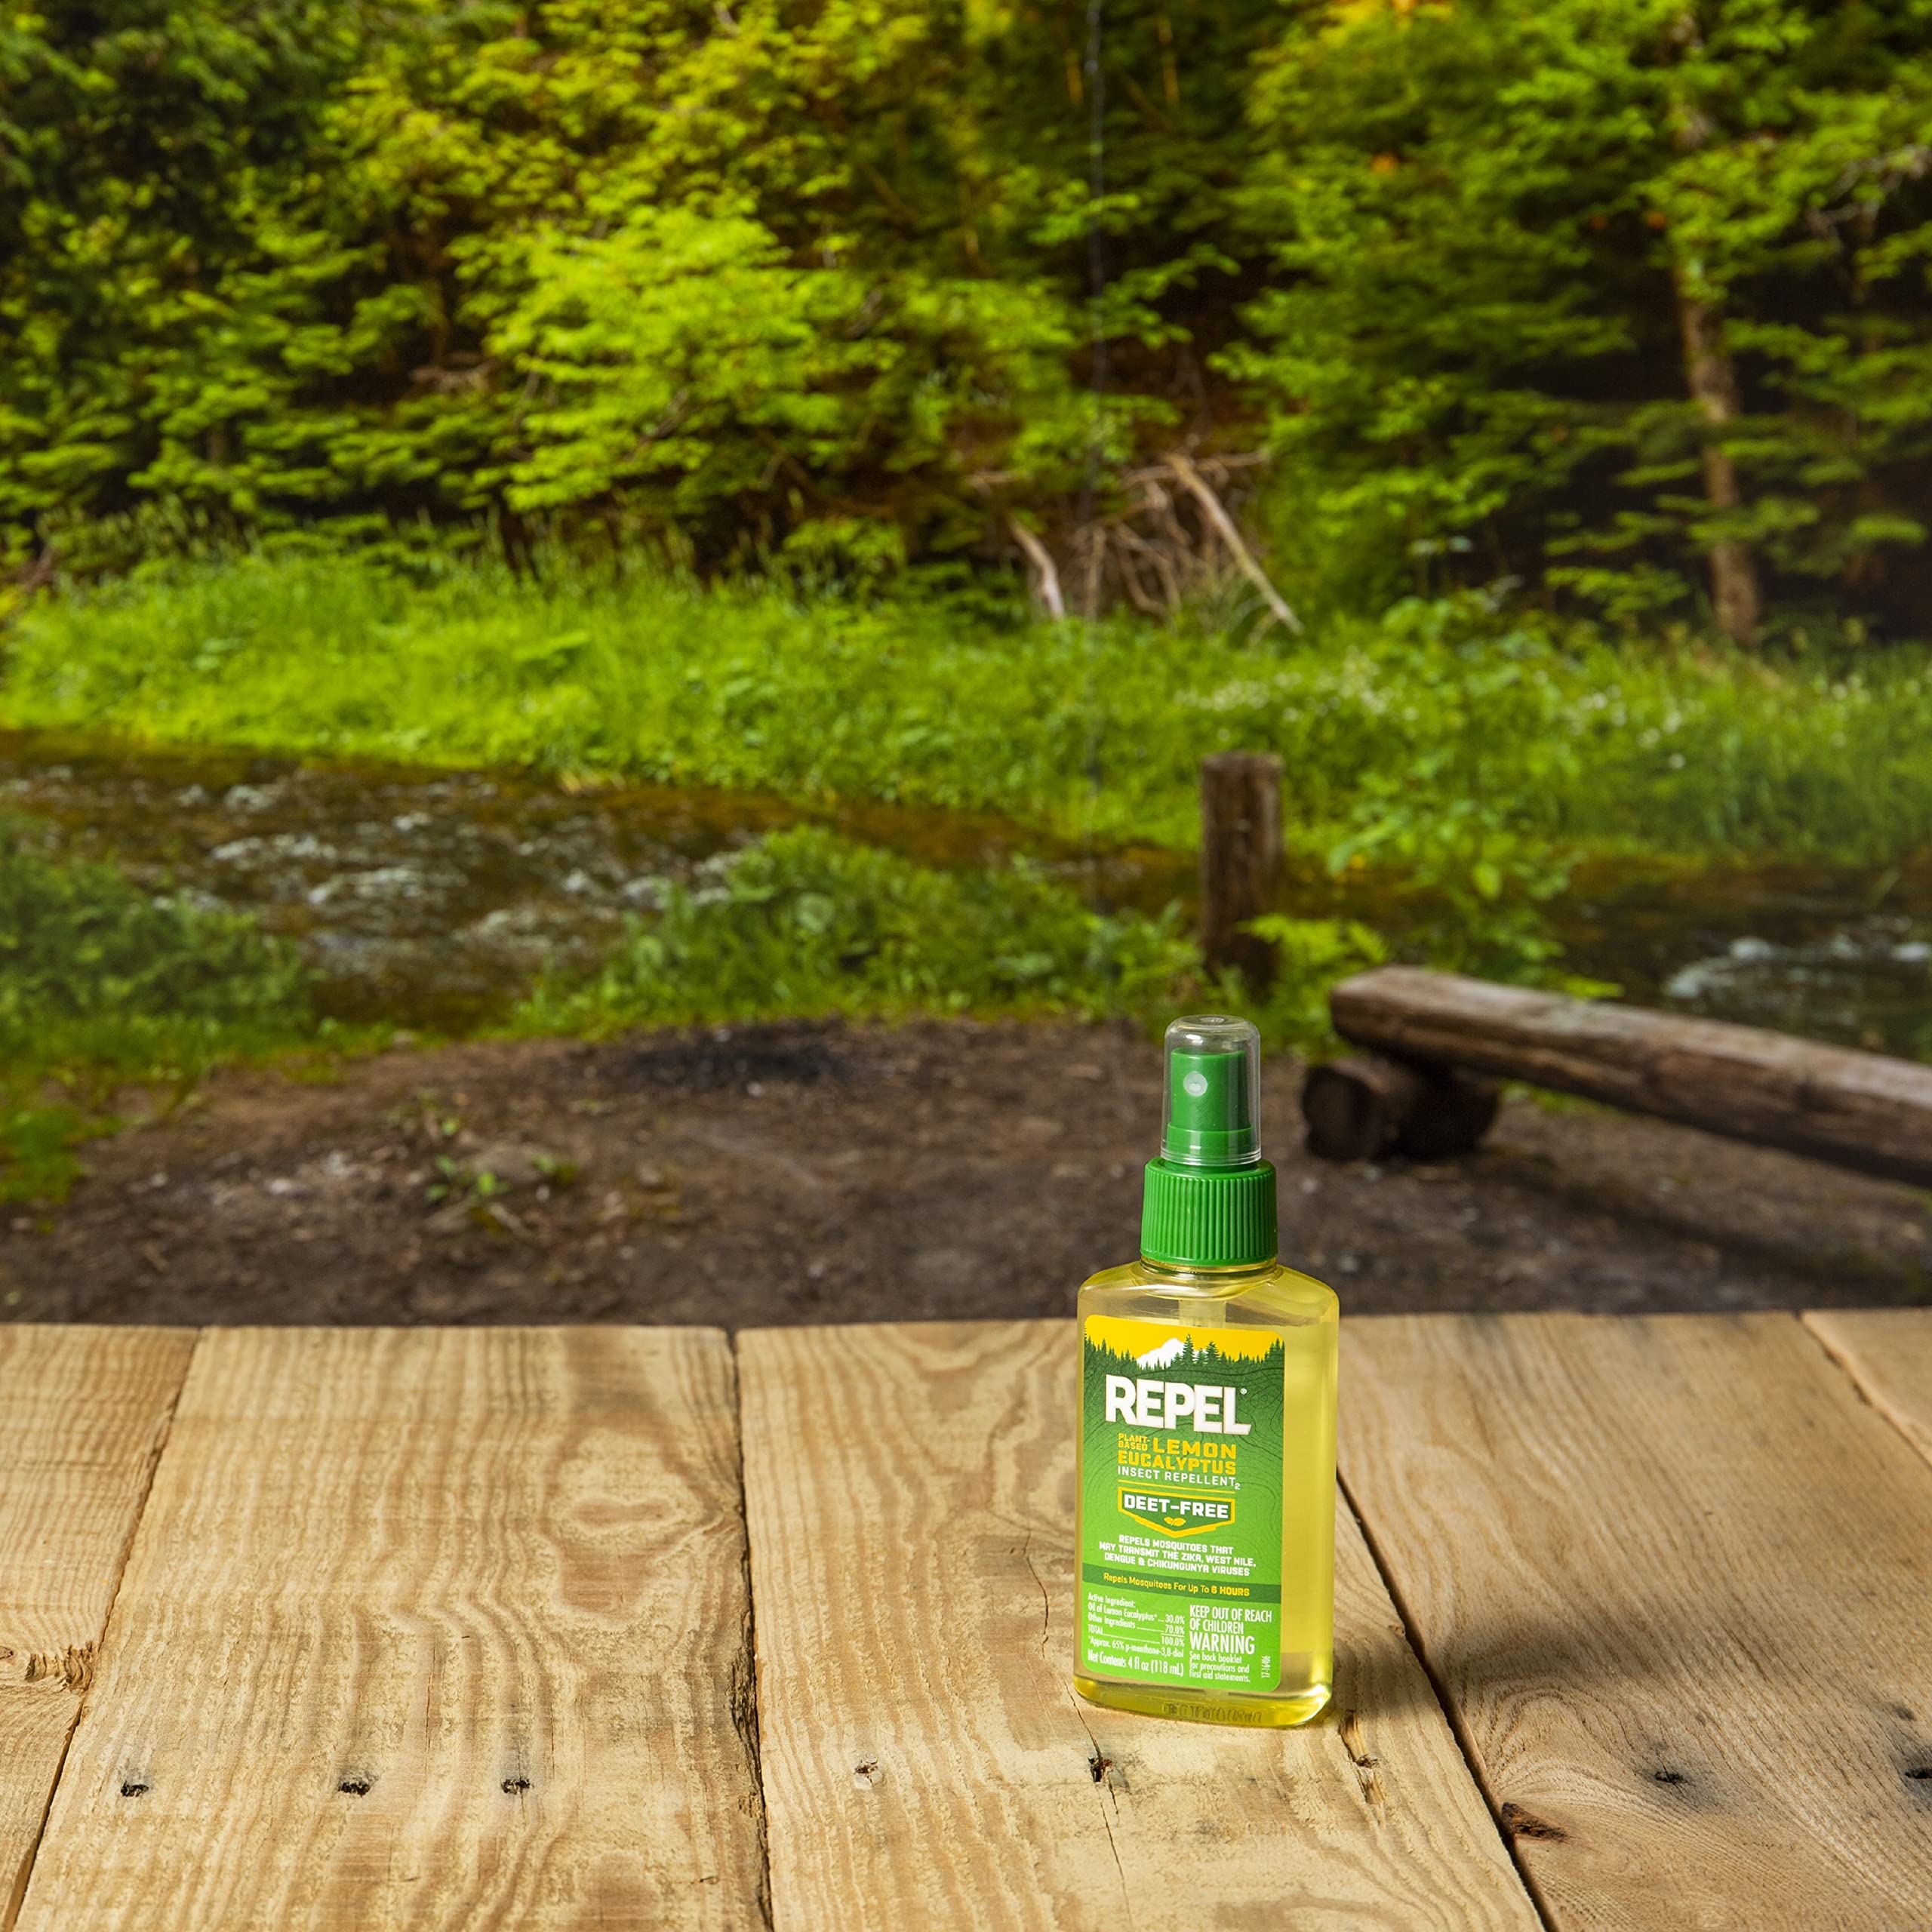 Repel Plant-Based Lemon Eucalyptus Insect Repellent 4 Ounces, Repels Mosquitoes Up To 6 Hours